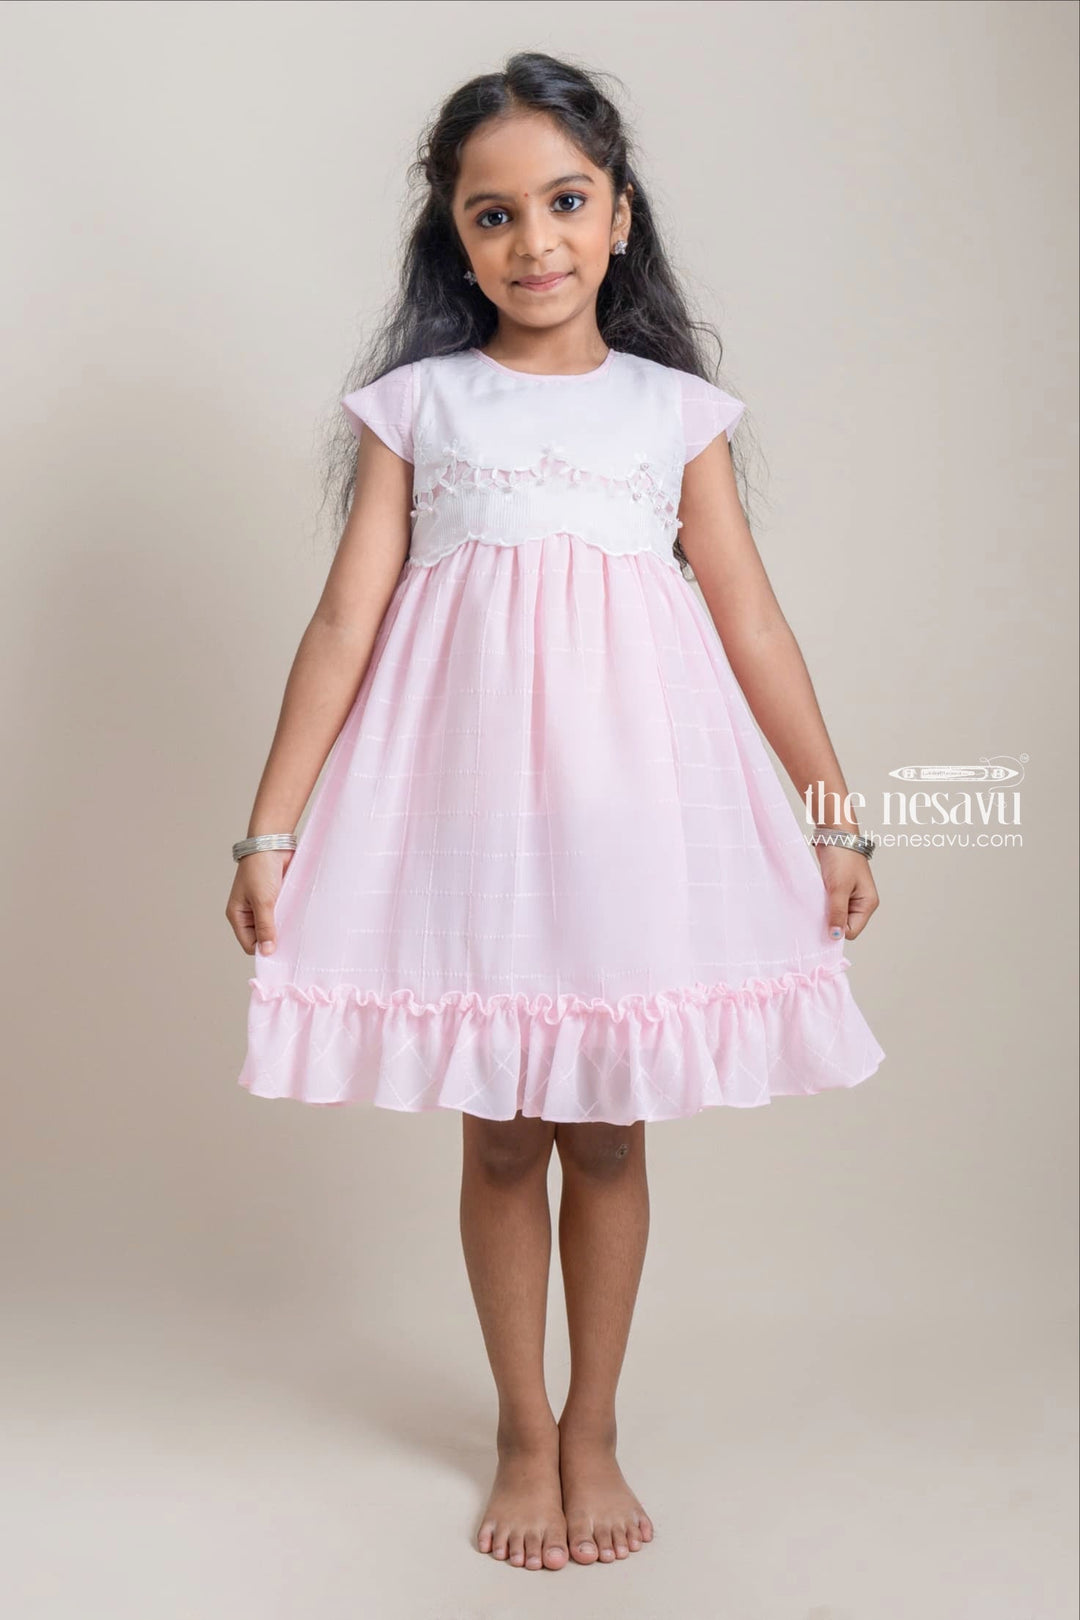 The Nesavu Girls Fancy Frock Lovely Colour Block Embroidery Design Pink Frock For Baby Girls Nesavu 16 (1Y) / Pink / Crepe GFC1031A-16 Premium Cotton Dress For Girls | Latest Cotton Dresses | The Nesavu